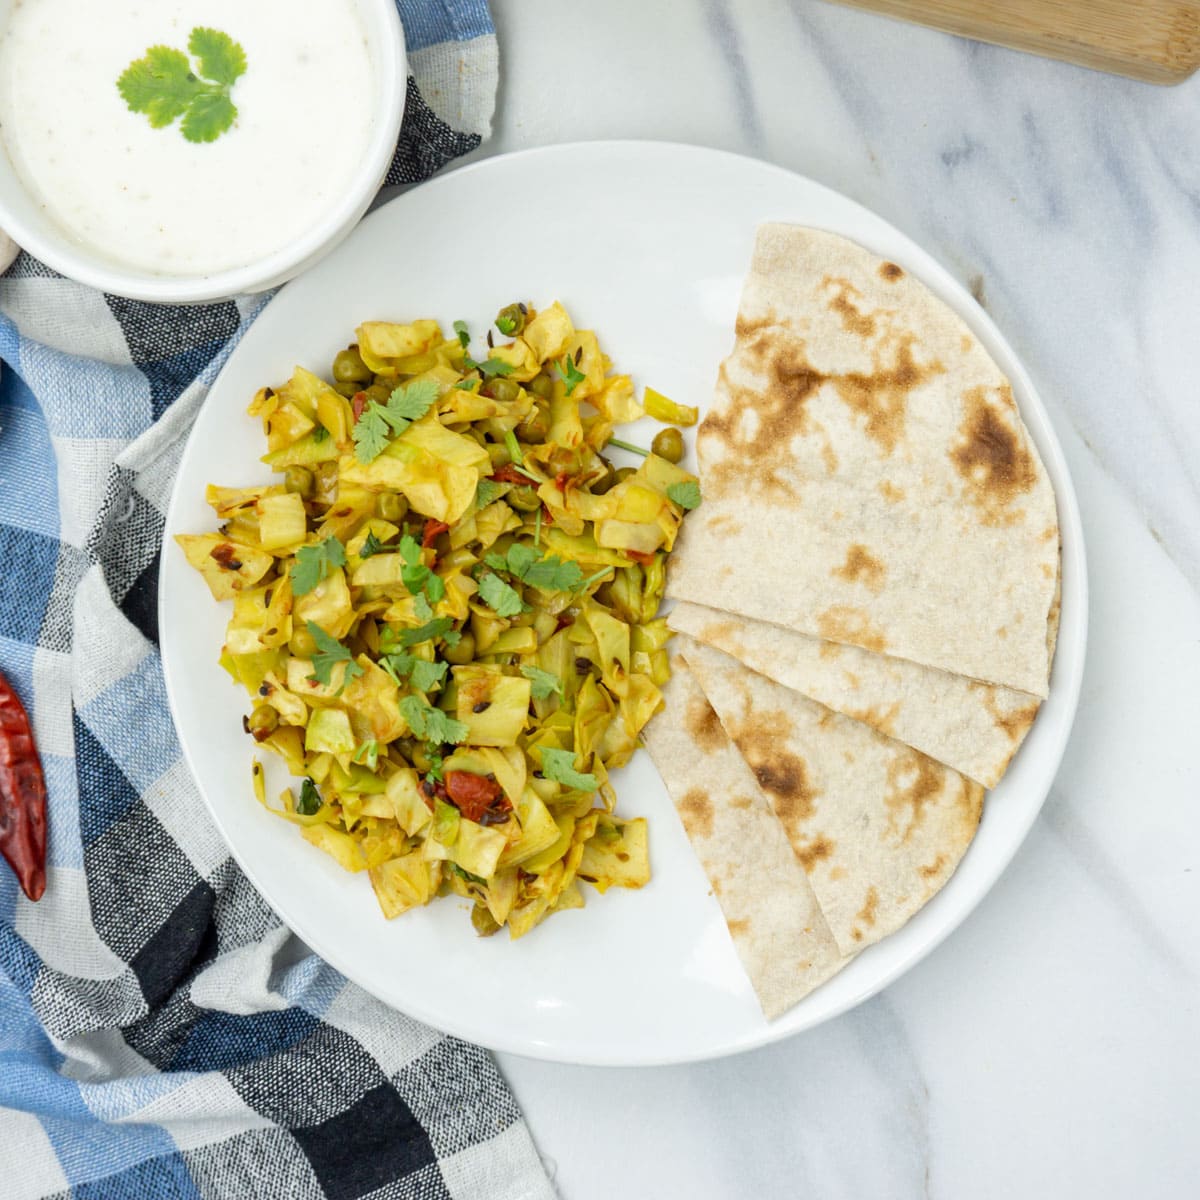 Cabbage peas (patta gobi matar) in a plate with roti